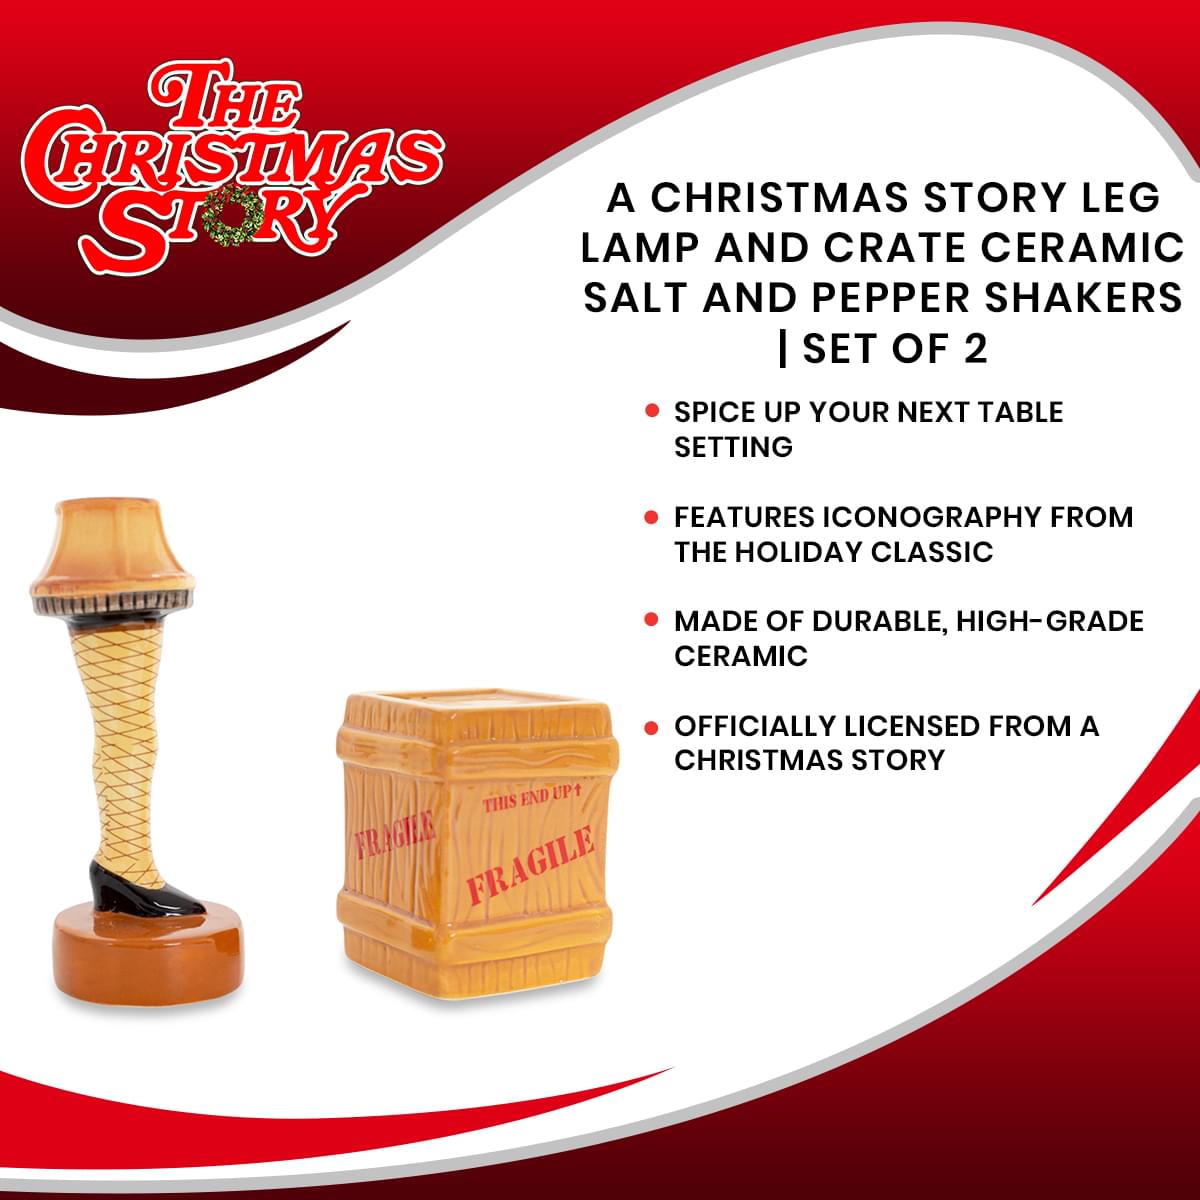 A Christmas Story Leg Lamp and Crate Ceramic Salt and Pepper Shakers | Set of 2